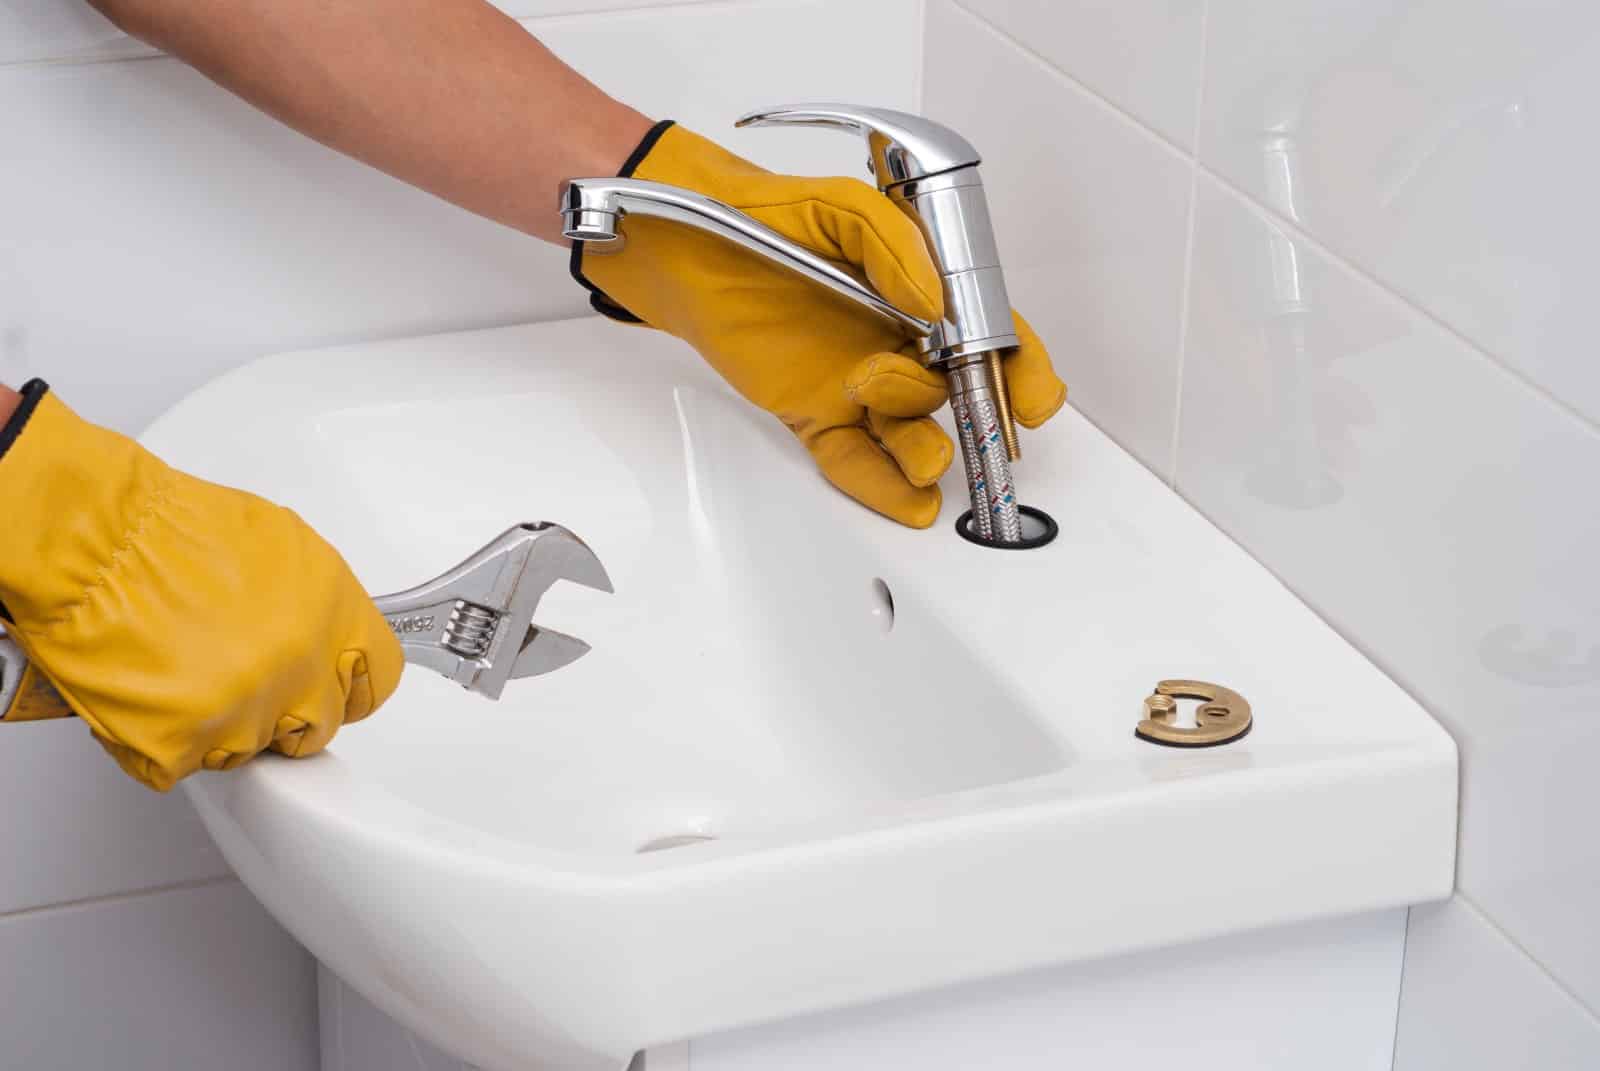 Plumber installing a new kitchen sink faucet